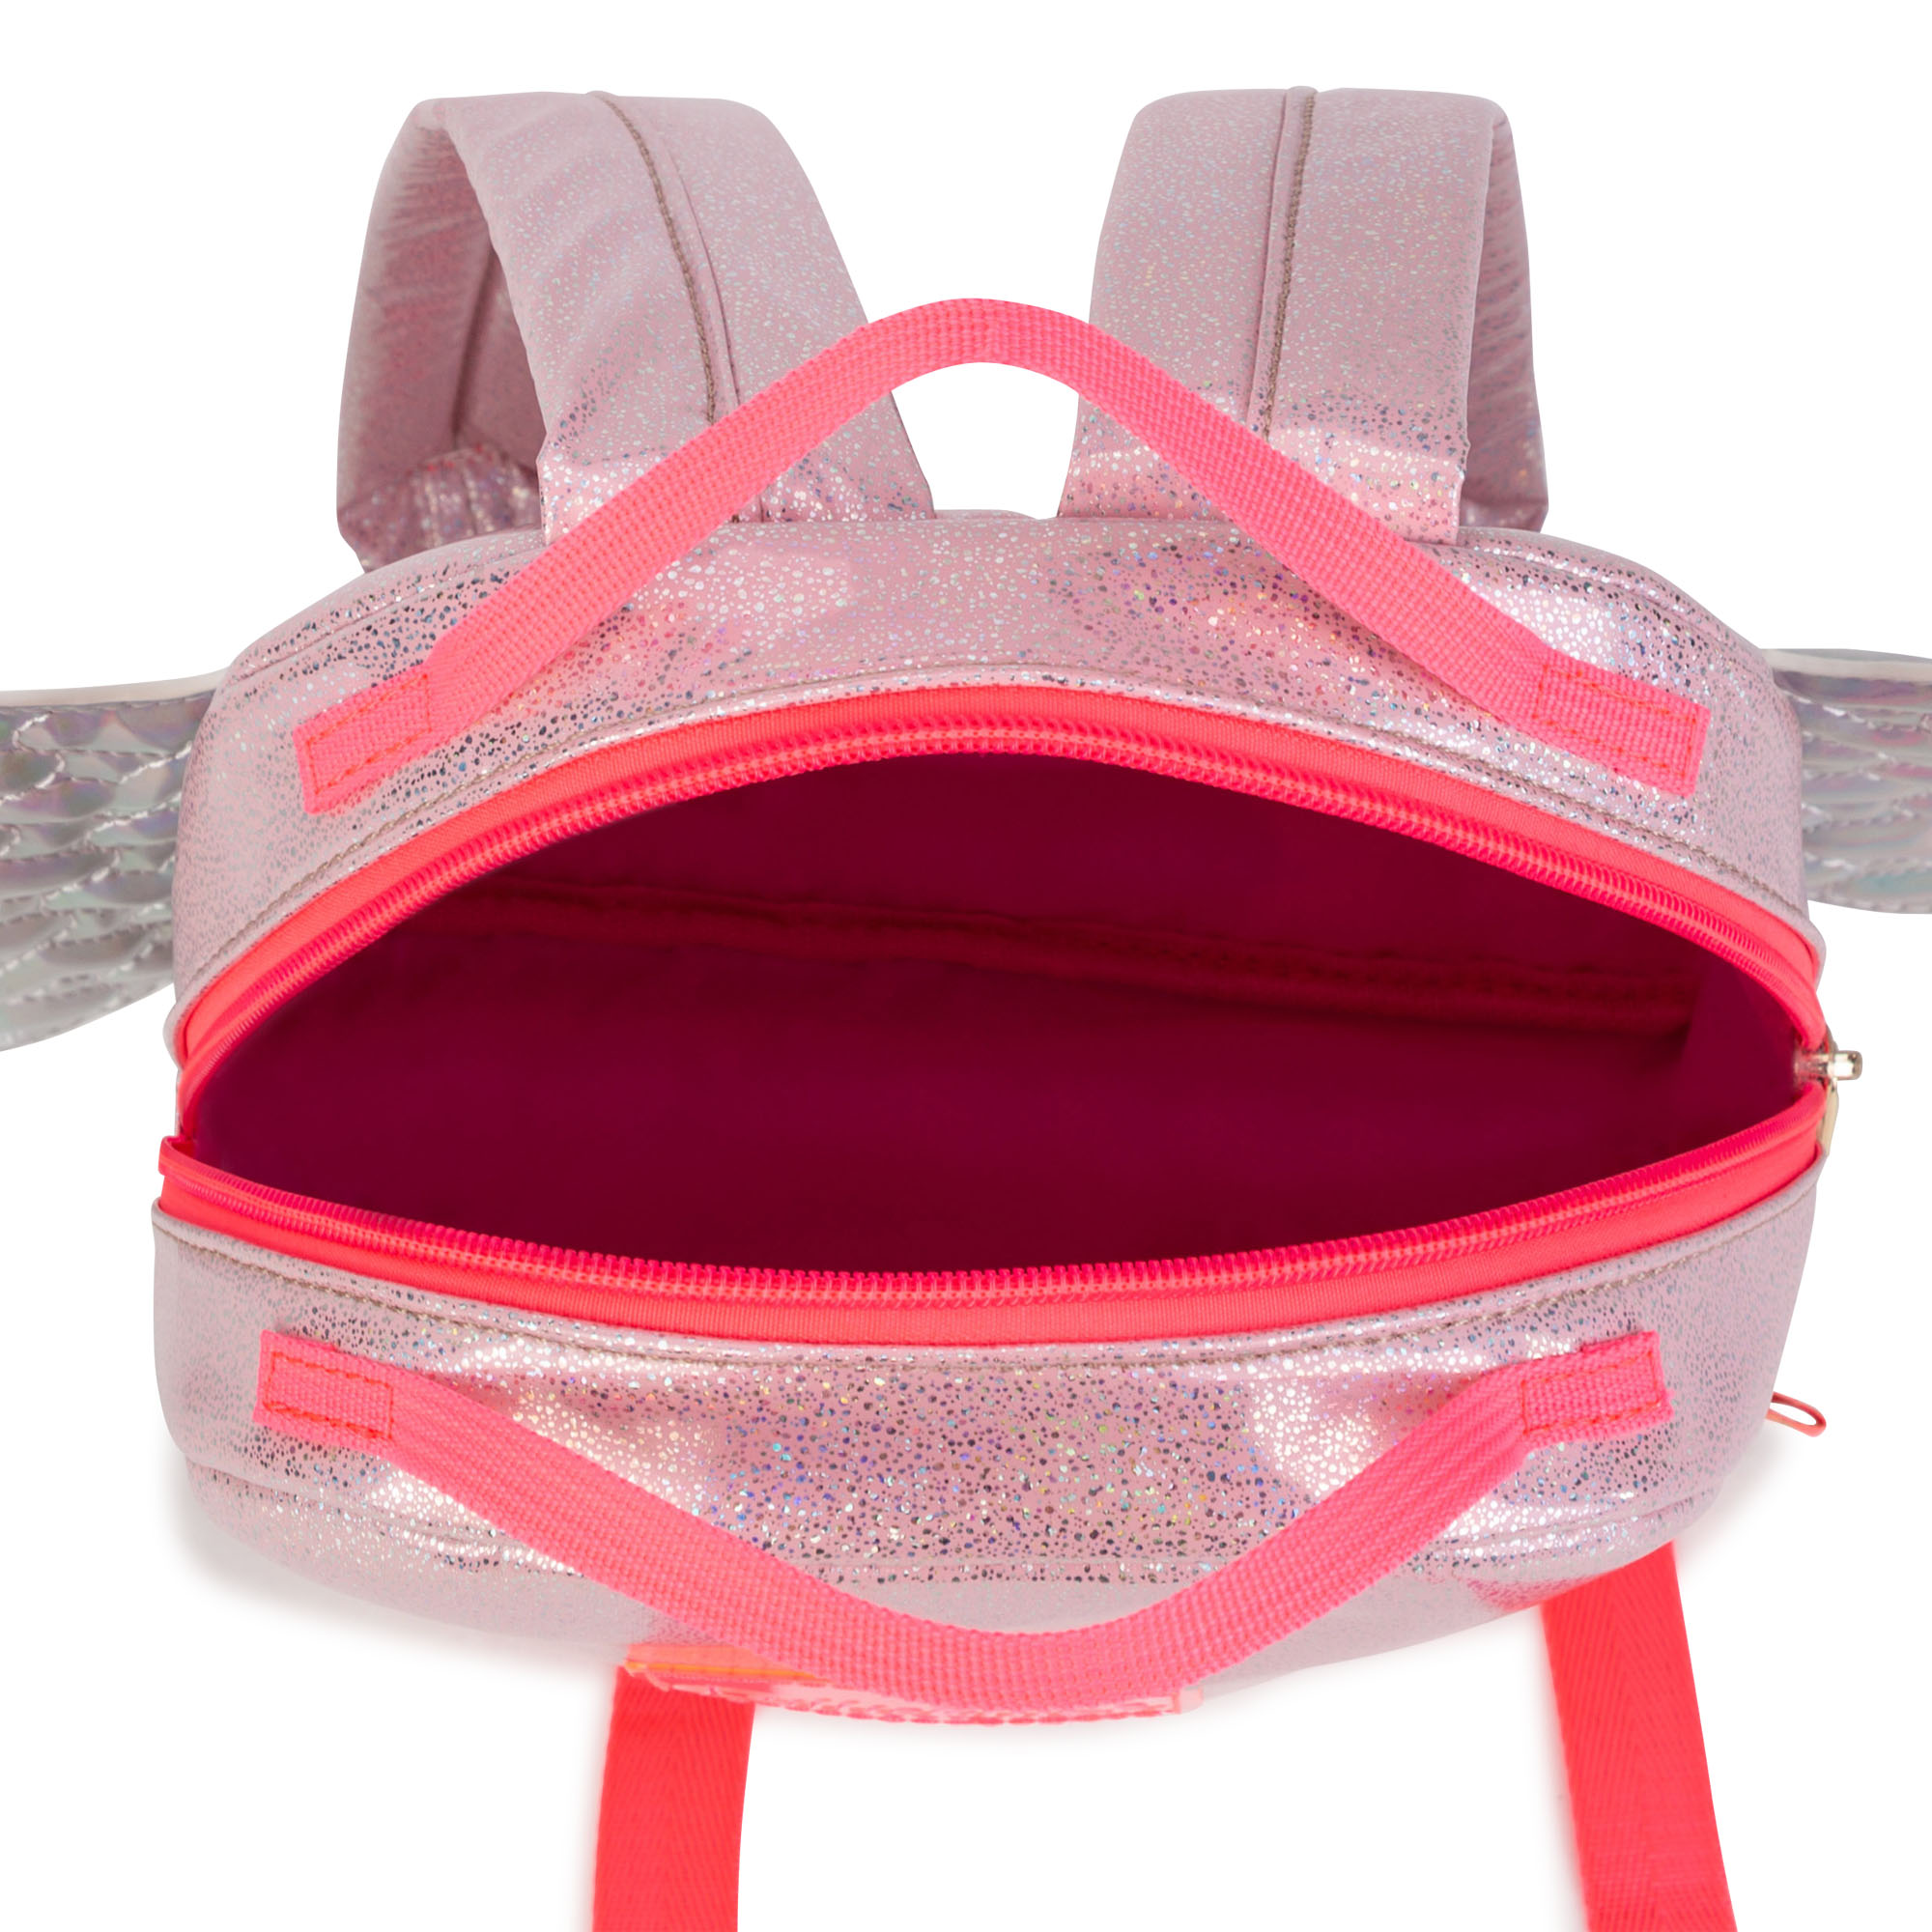 backpack with angel wings BILLIEBLUSH for GIRL